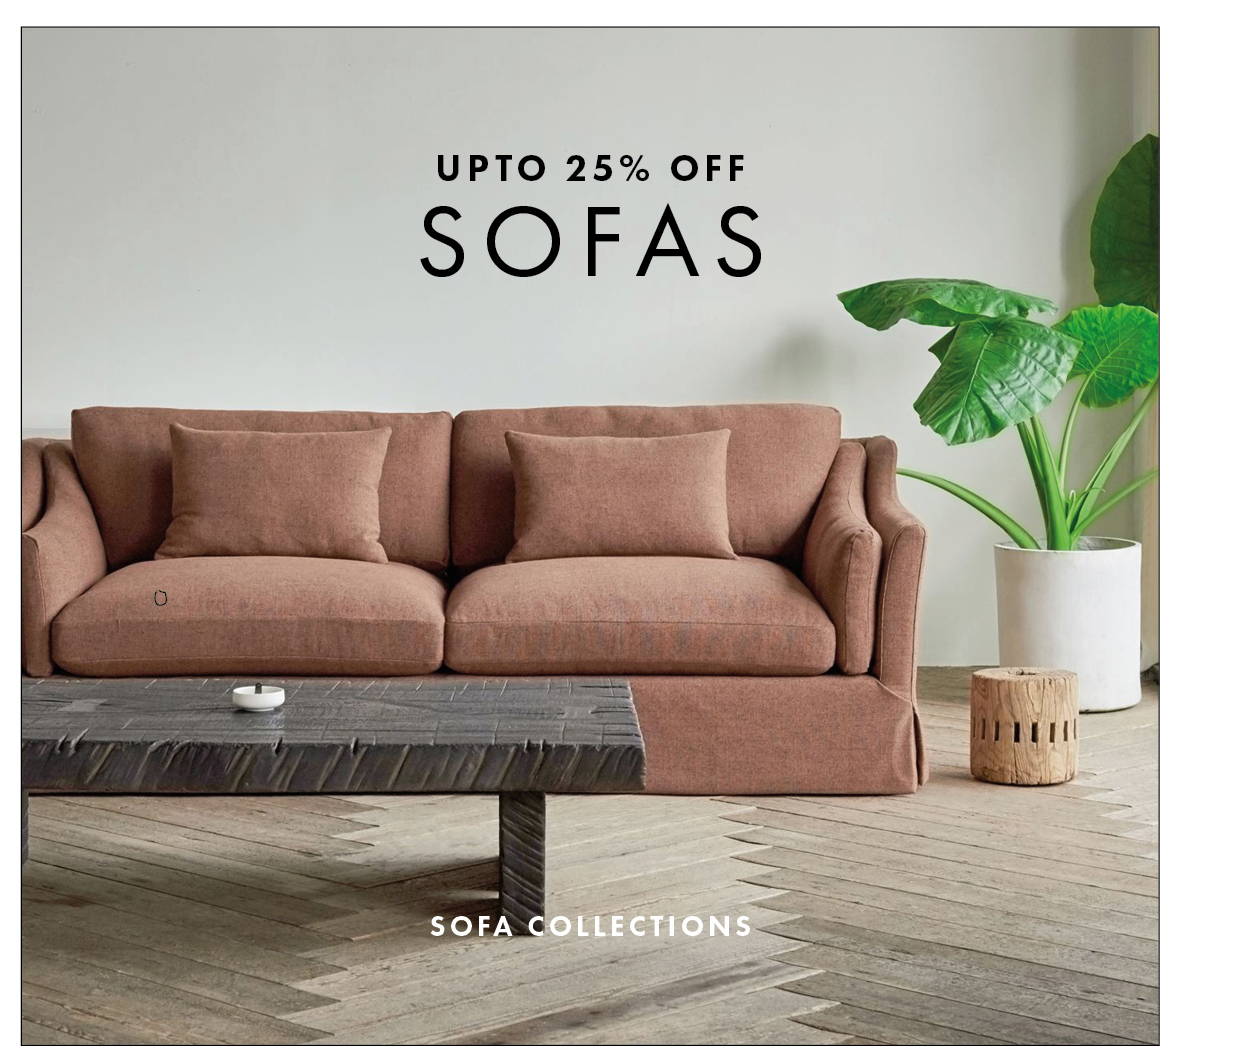 Upto 25% Off Sofas & Comfy Armchairs At BF Home - Spring Home Edition Now On